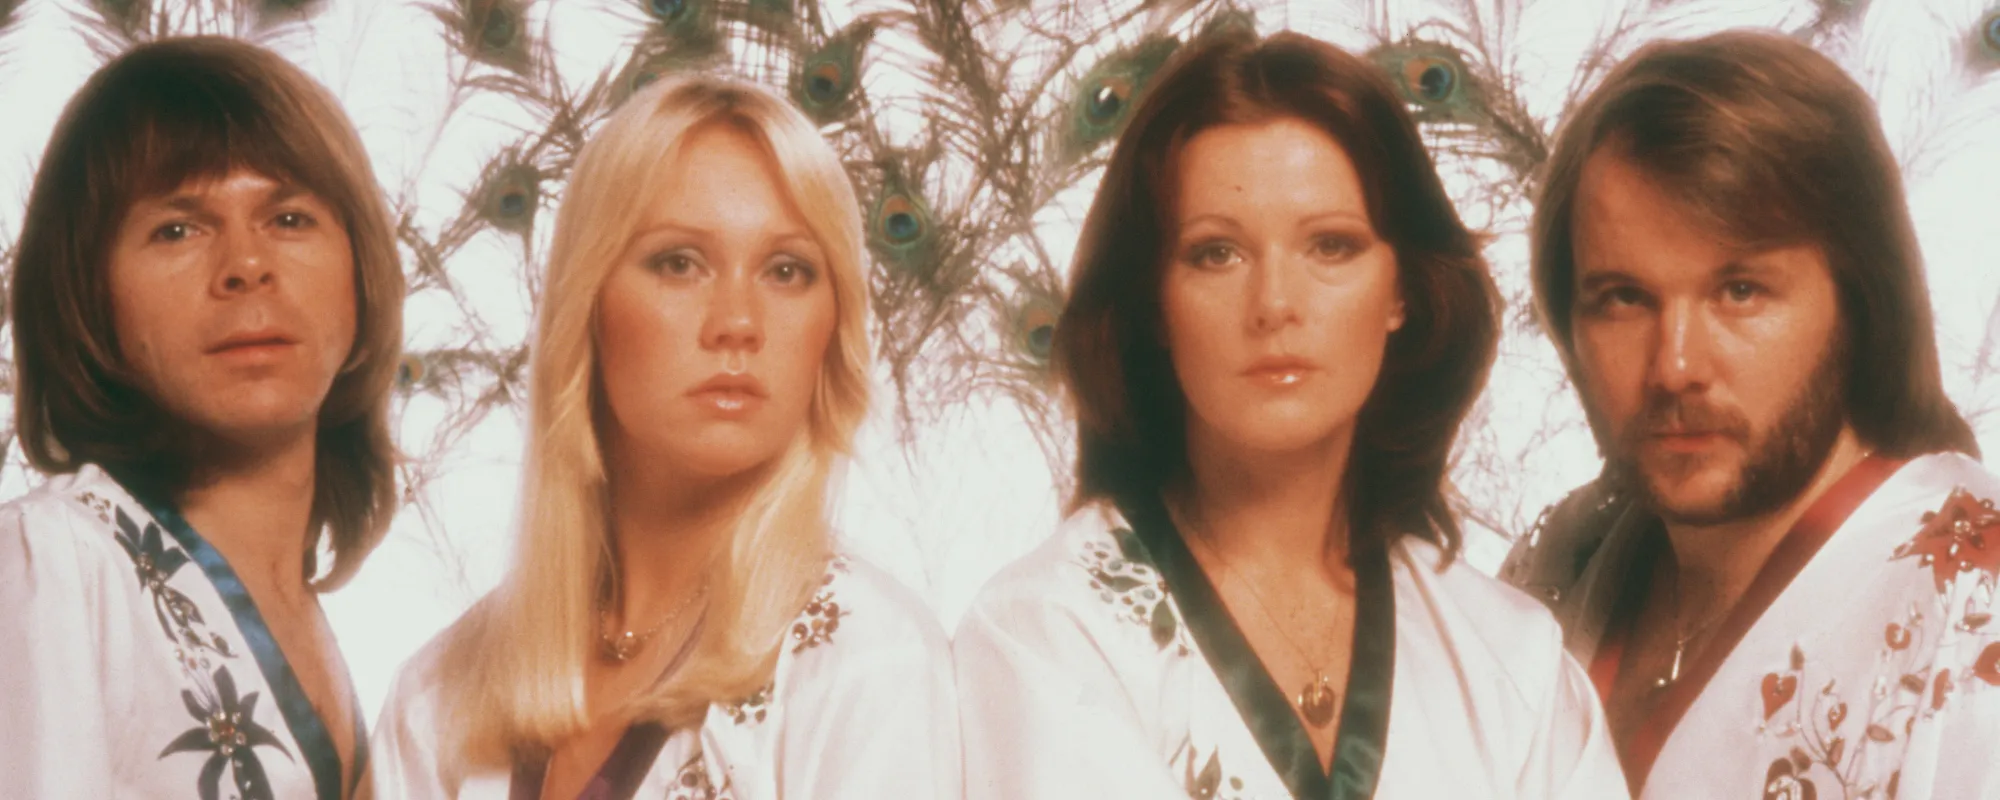 Nothing Promised, No Regrets: The Real Meaning of “Voulez-Vous” by ABBA